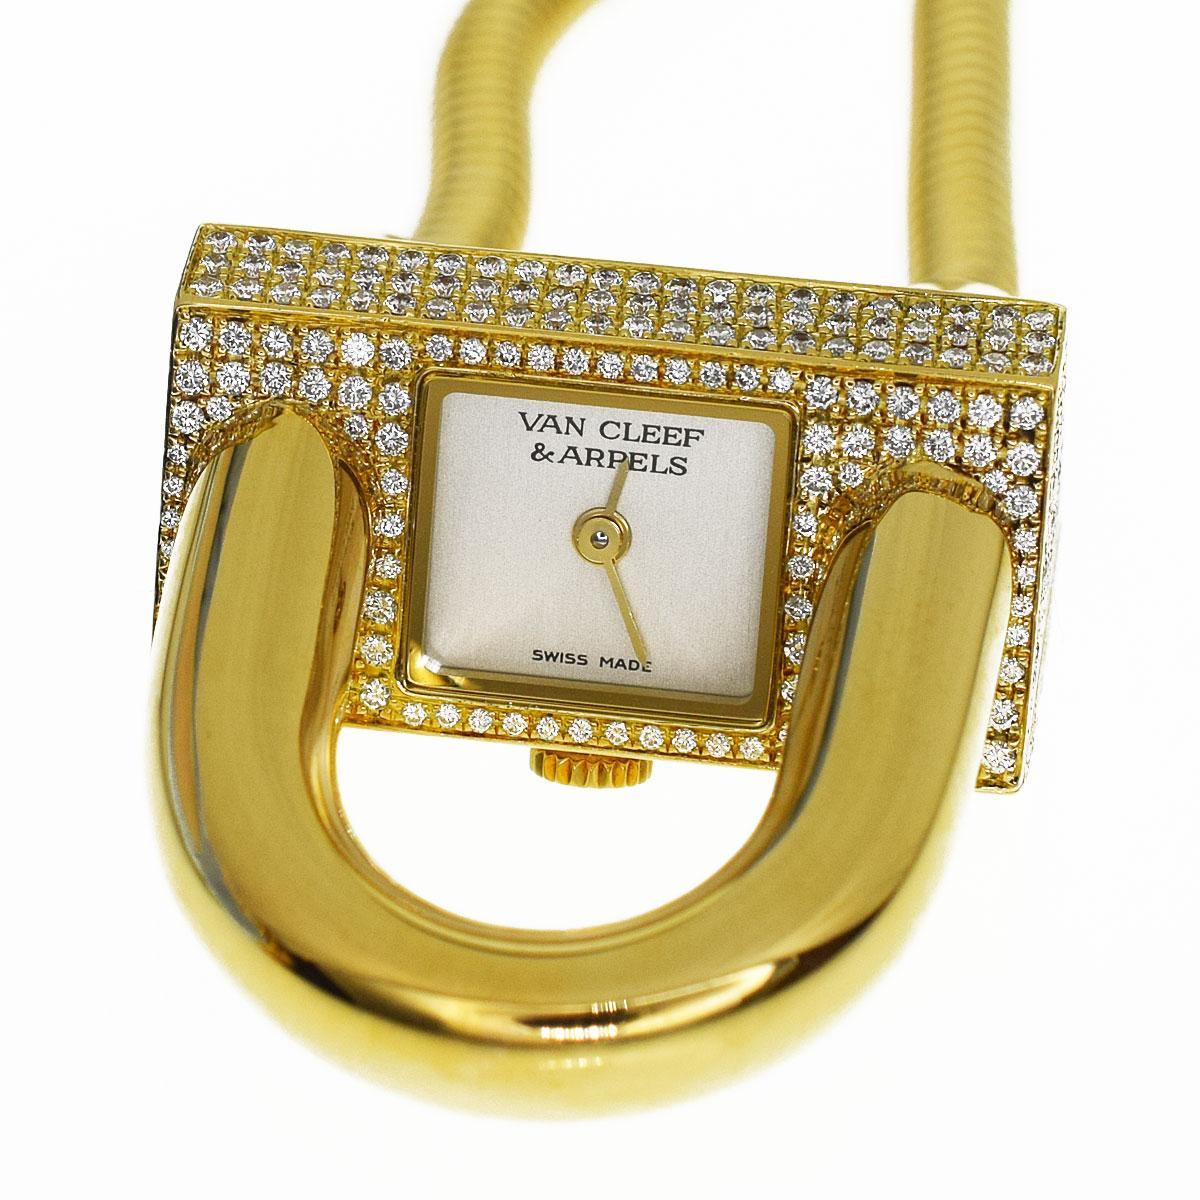 Brand :VanCleef&Arpels
Name:Miss Cadena Bracelet Watch
Material:Diamond, 750 K18 YG Yellow Gold
Comes with:VCA Box,Case, VCA repair certificate (Jan 2019)
Dial:Ivory
Band length(inch) :16-17cm / 6.29